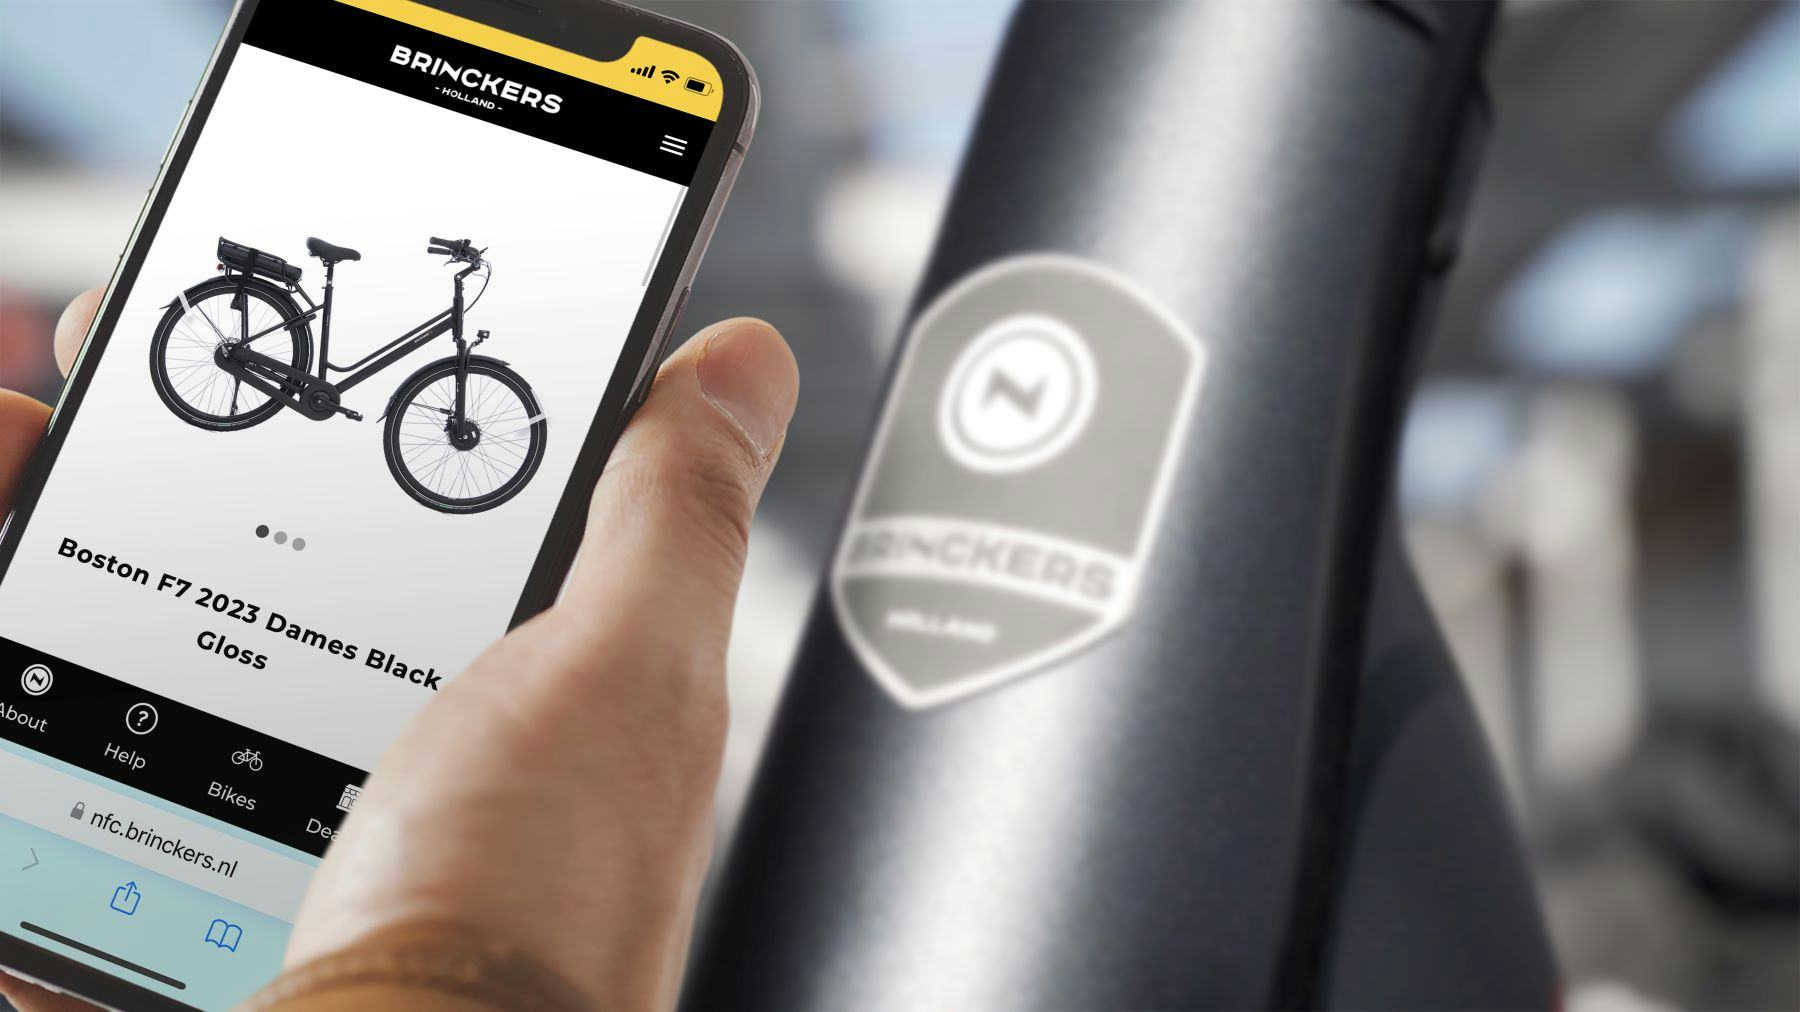 By holding the phone near the headset logo the 'app' starts up. Brinckers adds no additional costs for the NFC technology, it is included in the price of the e-bike. - Photo Brinckers